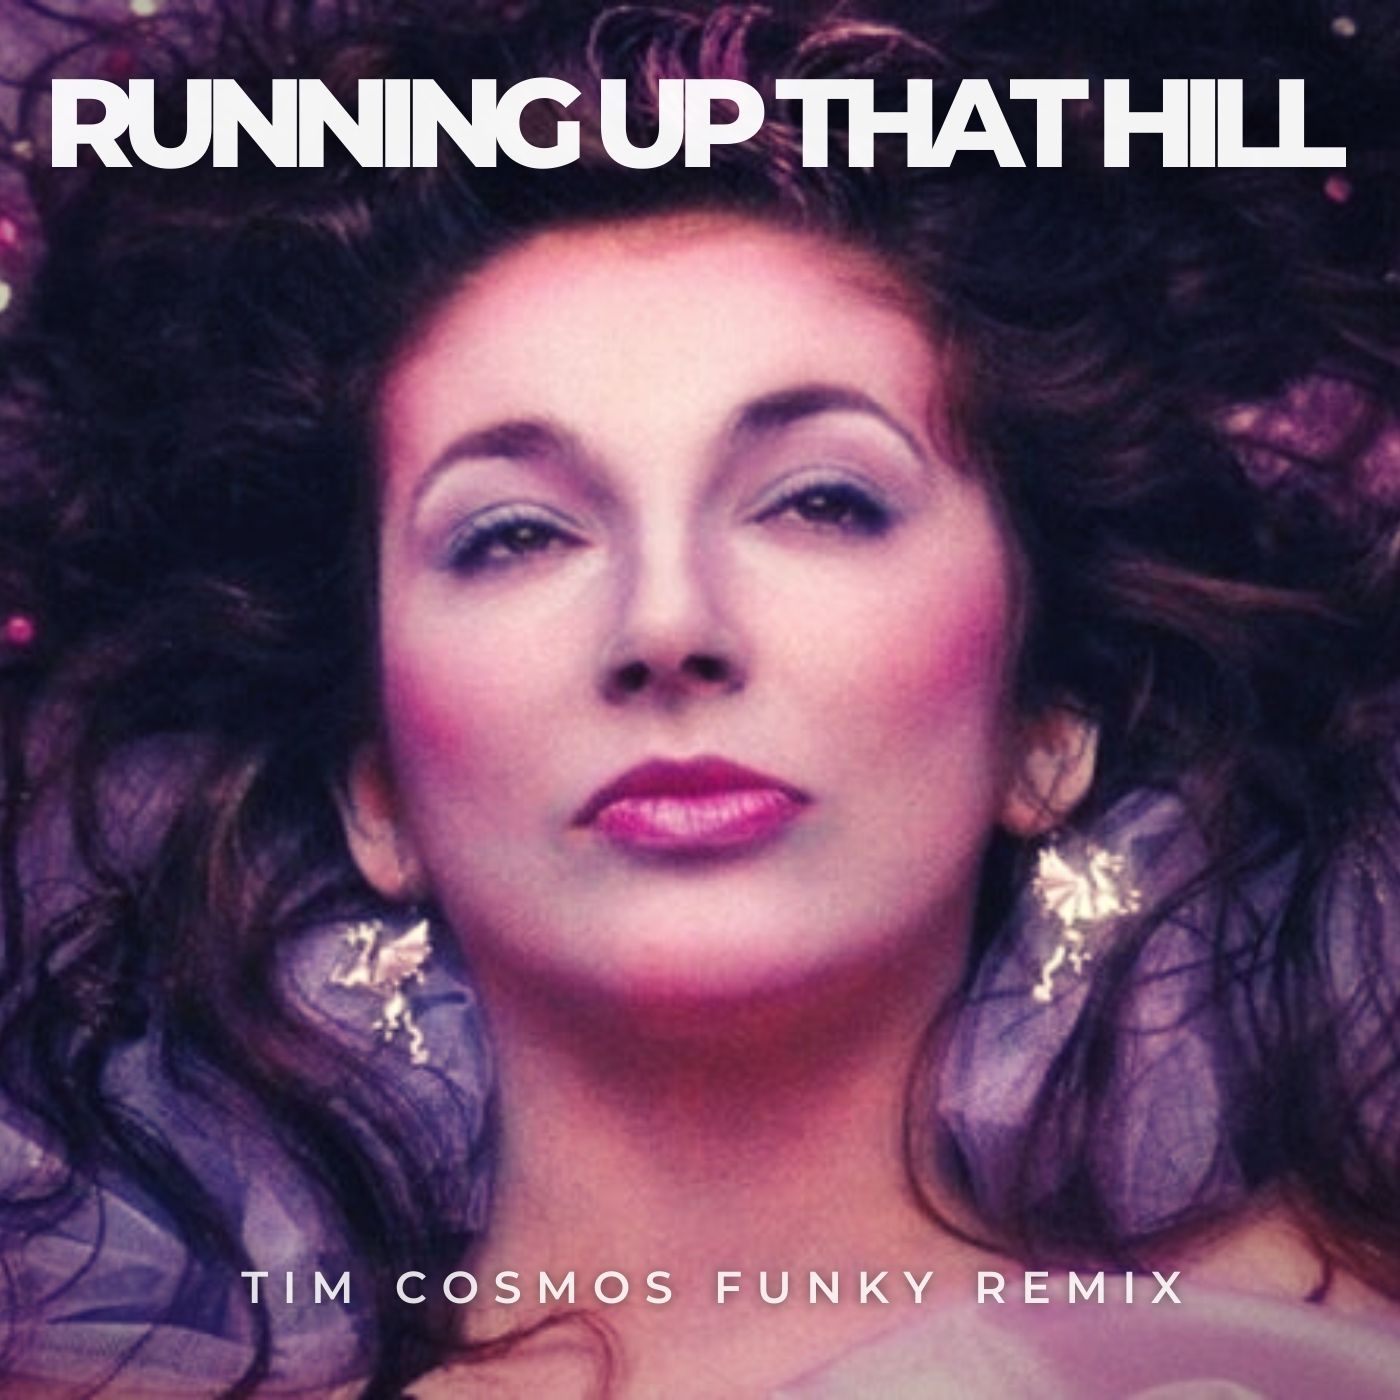 Daxistin Kate Bush - Running Up That Hill (Tim Cosmos Funky Remix) [HYPEDDIT #01 NUDISCO CHART]